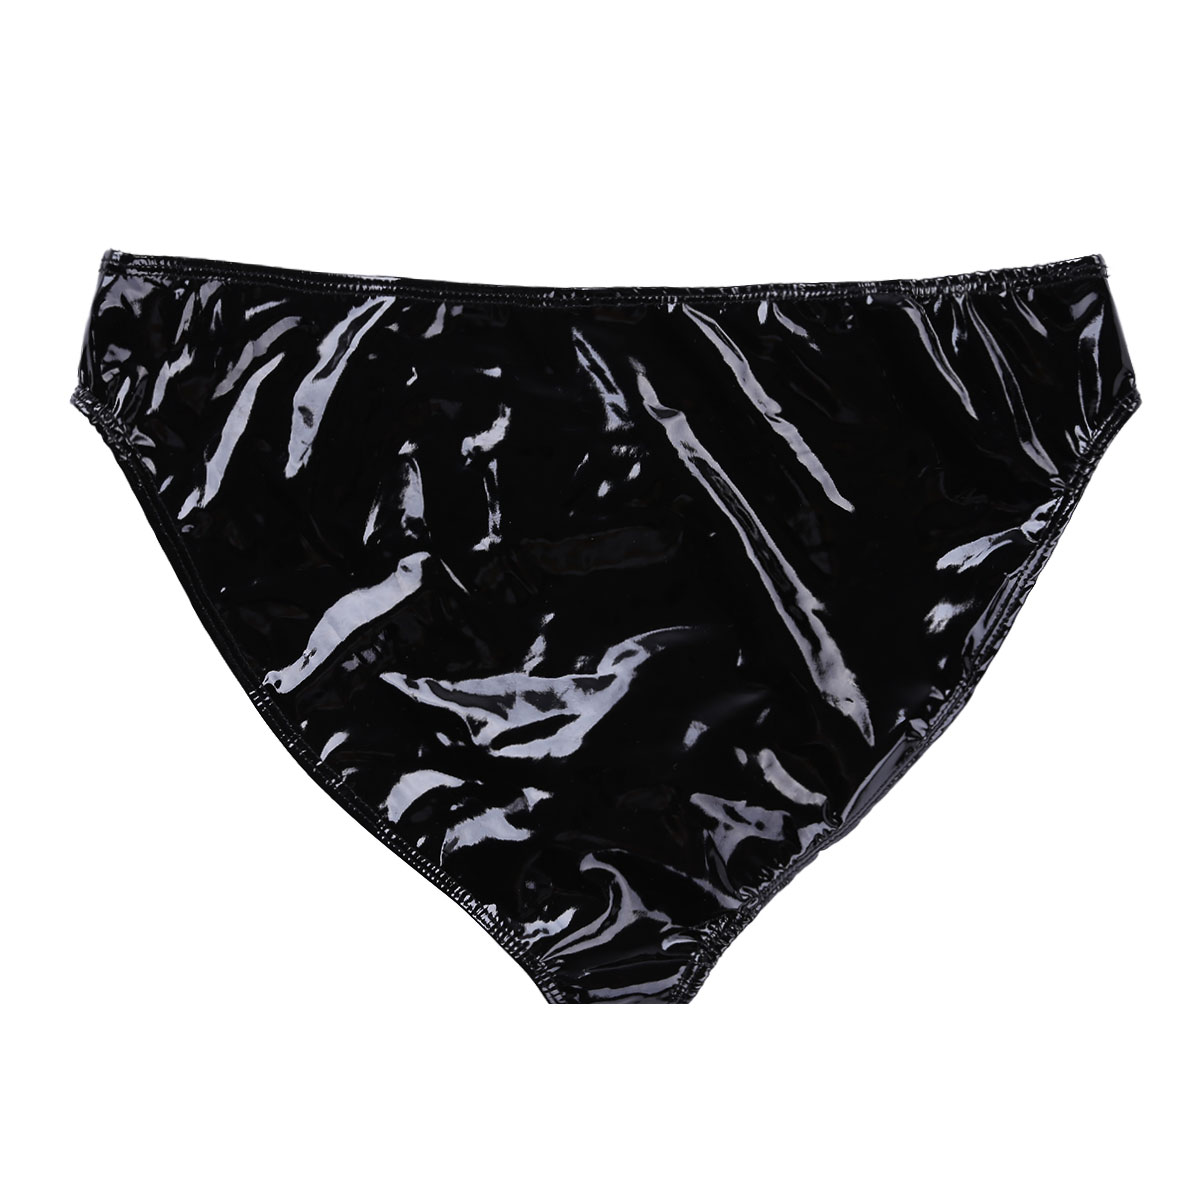 CHICTRY Mens Patent Leather Closed Penis Sheath Boxer Shorts Jammer Swimsuit